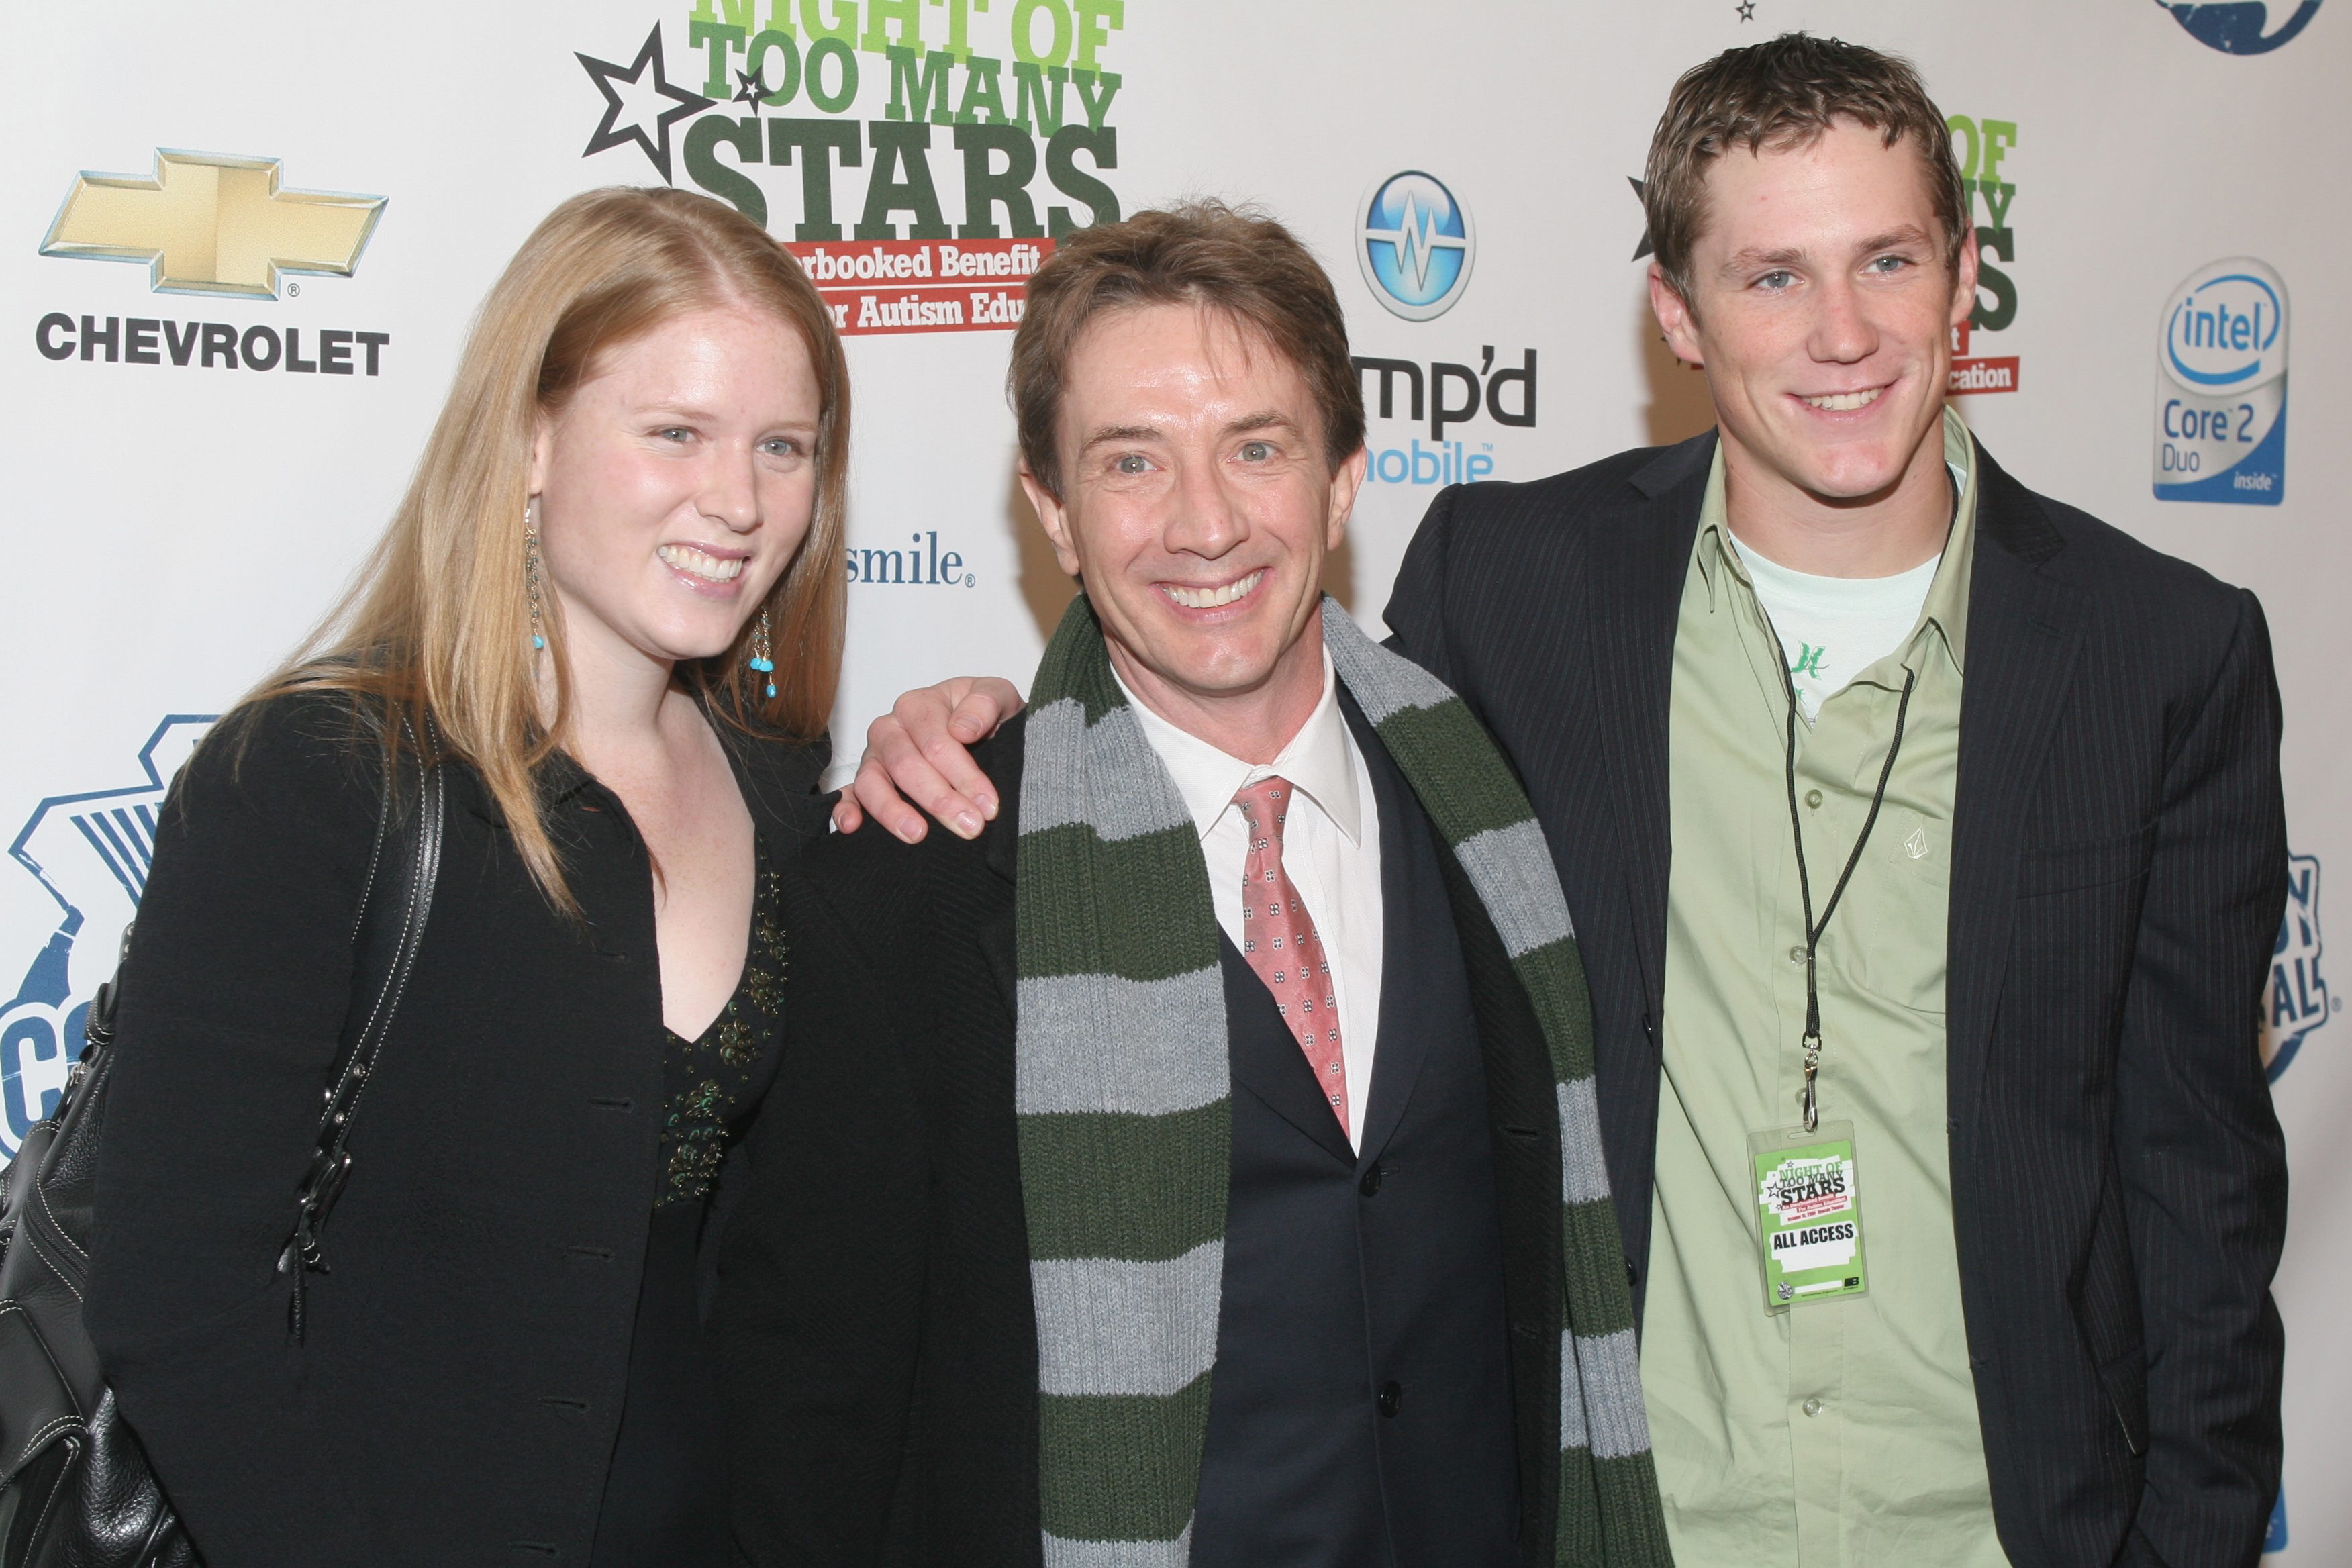 Martin Short with son Oliver and daughter Katherine at the Comedy Central's "Night Of Too Many Stars," a benefit for Autism Education on October 15, 2006, in New York City. | Source: Getty Images